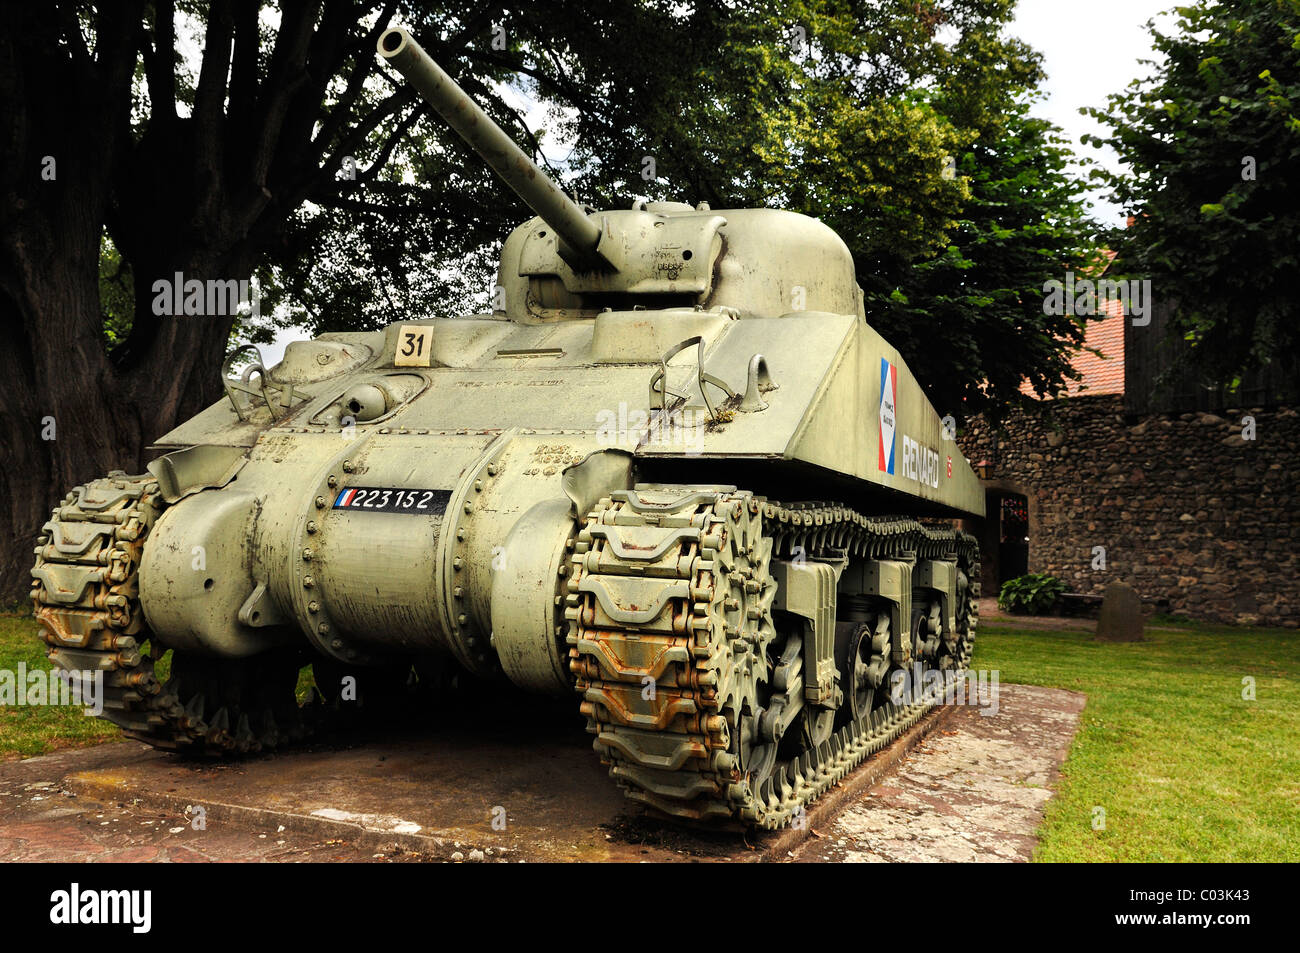 French tank memorial, Renard from World War II, 1944, in front of the city wall, Route du Vin, Kientzheim, Alsace, France Stock Photo